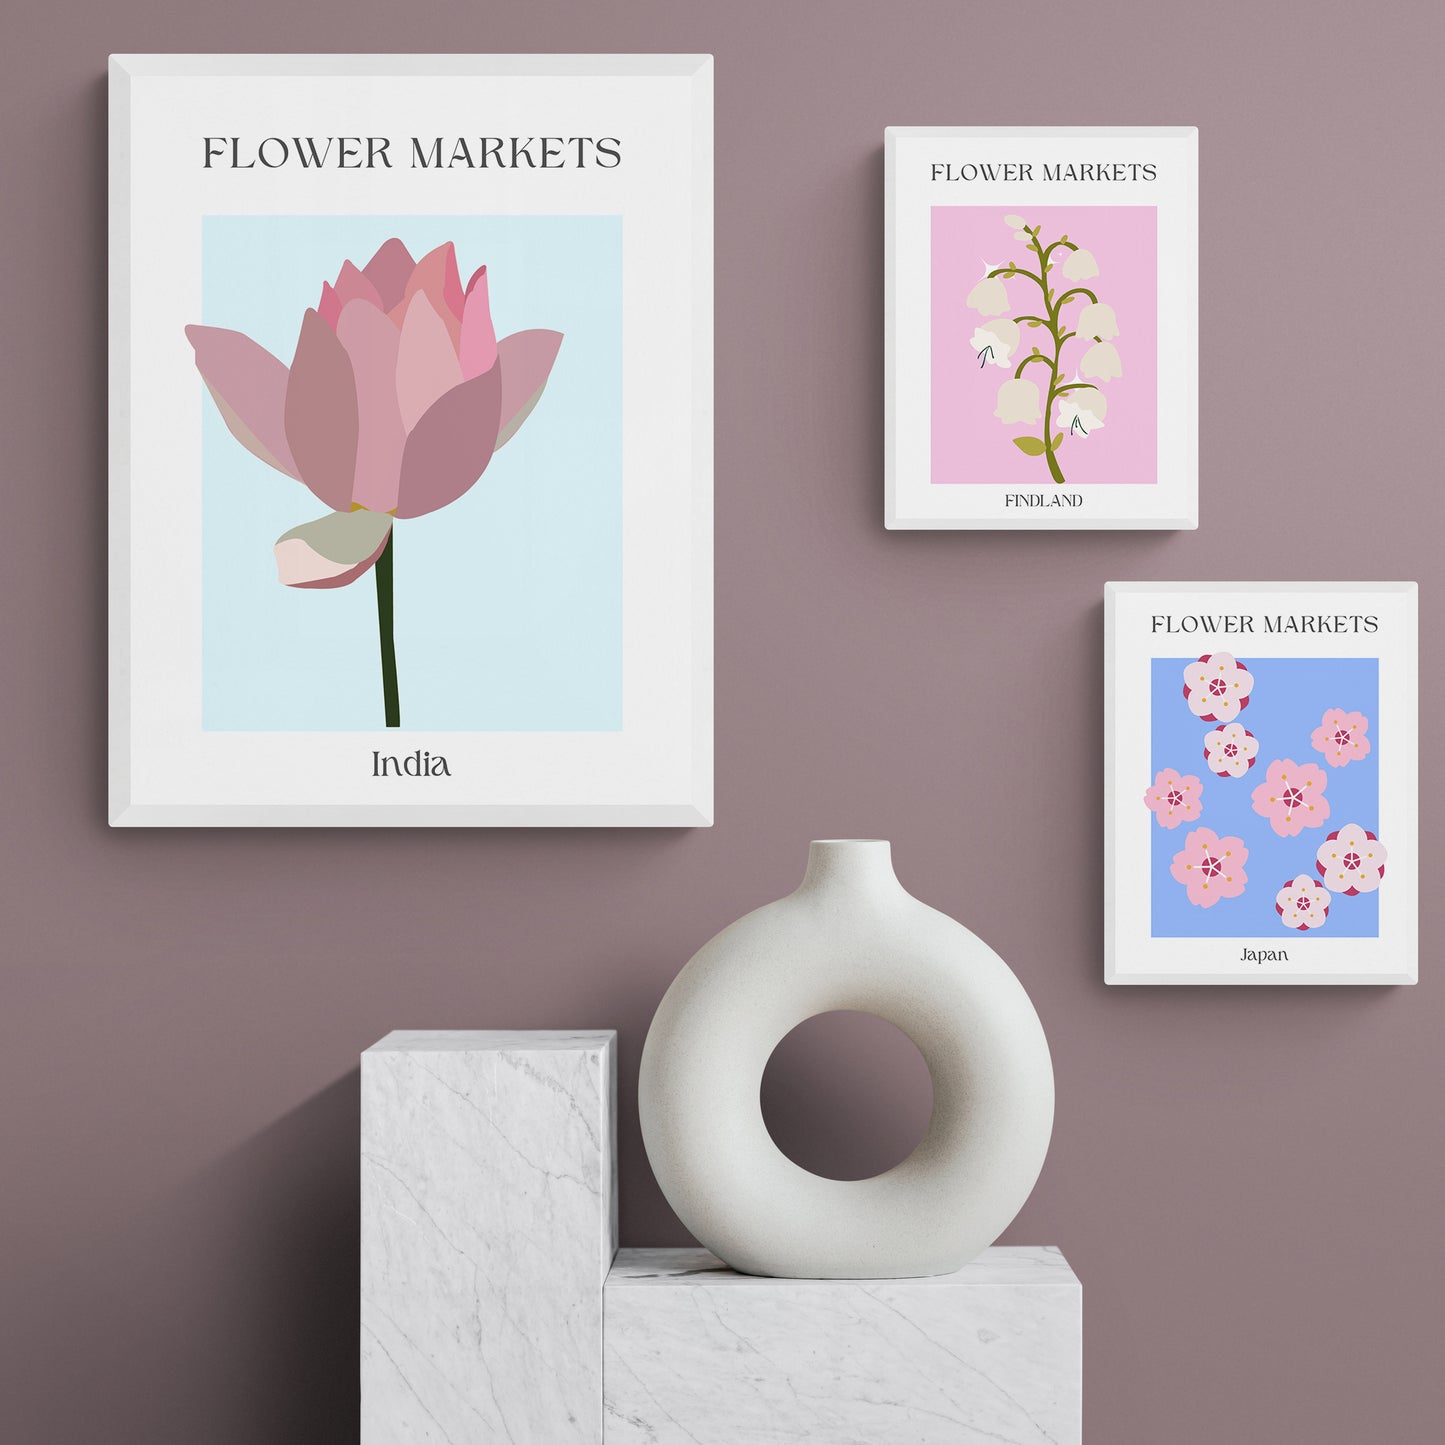 Celebrate the beauty of London's historical flower markets with Findland Flowers Market Print. This poster features a graphic art design of Columbia Road Flower Market and its colorful history, perfect for adorning the walls of your living room, kitchen, or bedroom. With its unique Scandinavian design, this poster adds style and elegance to any gallery wall. Buy now and add a touch of elegance to your home today.